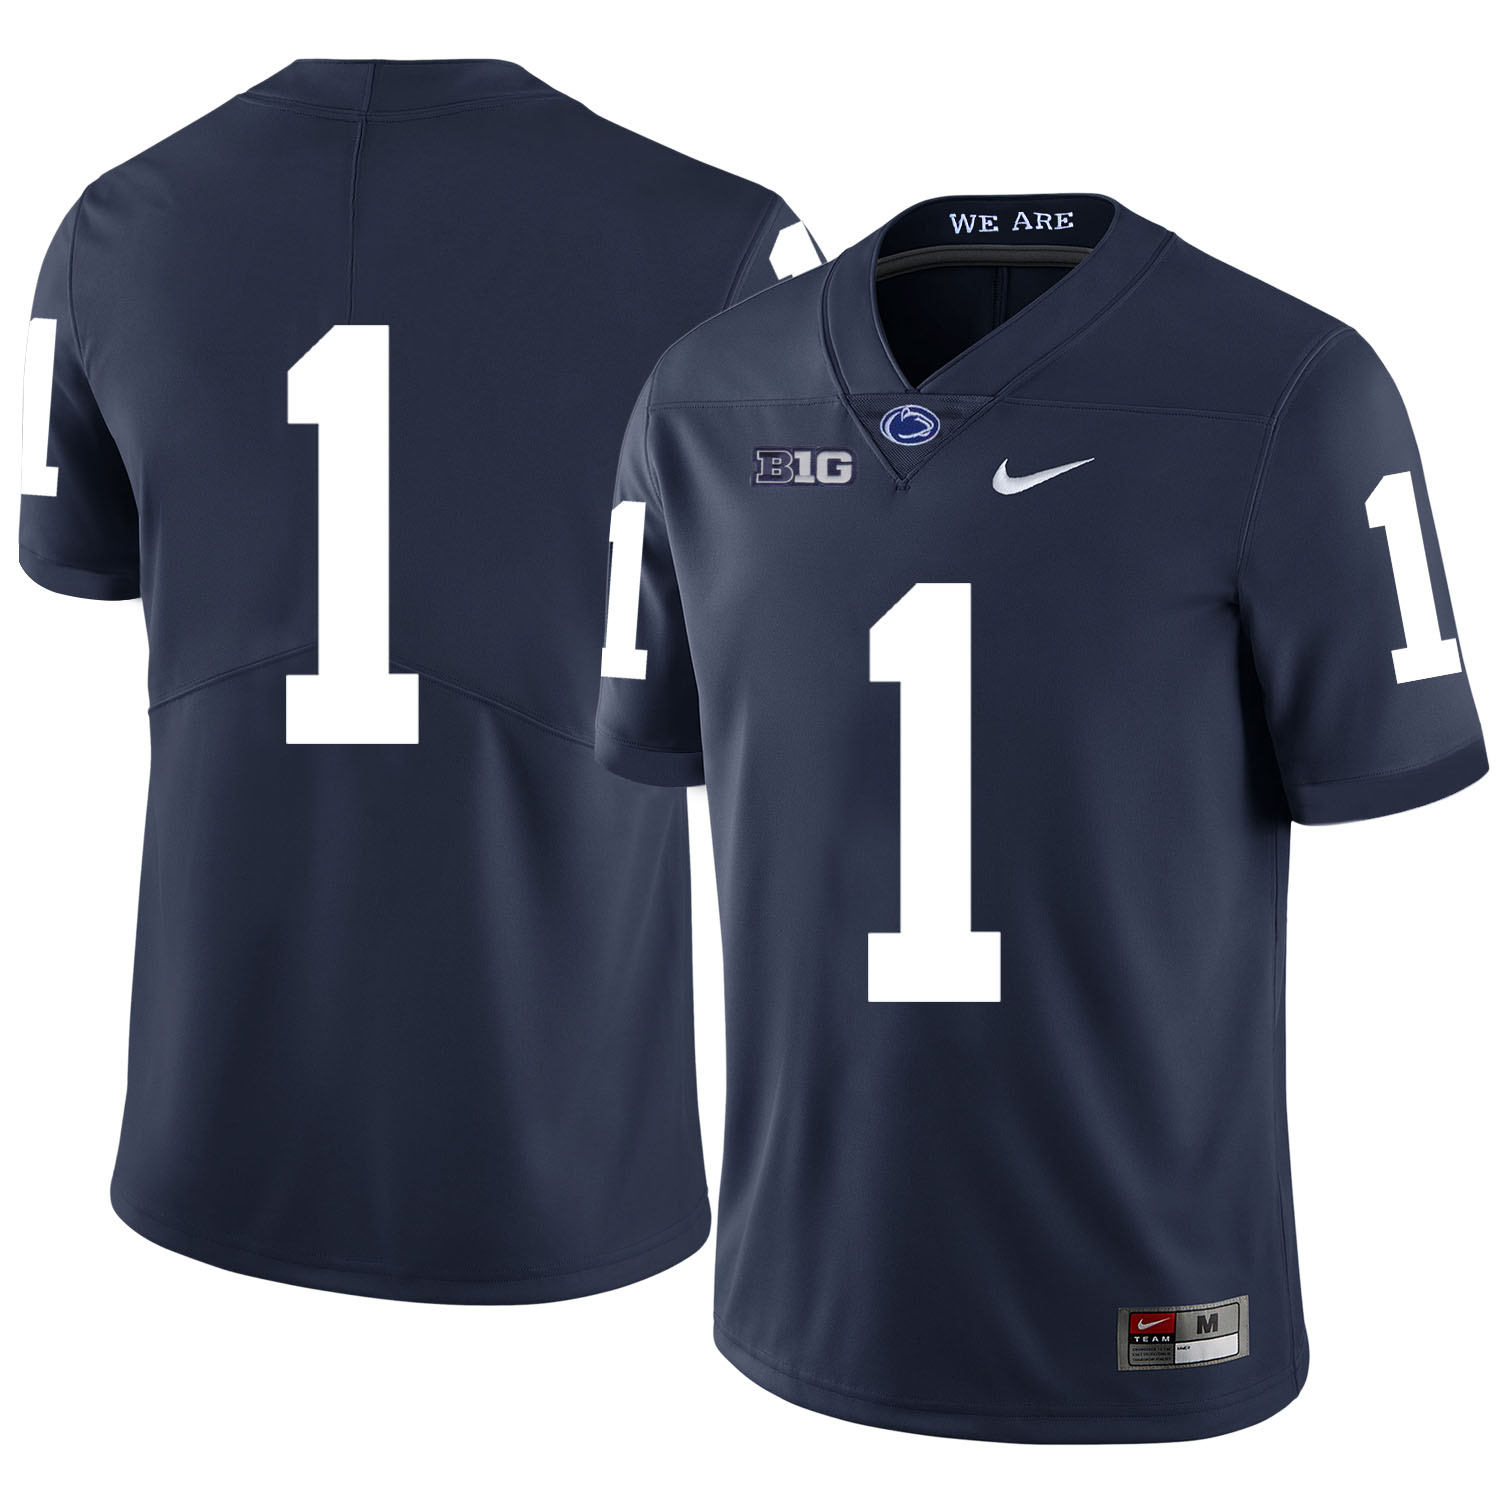 Penn State Nittany Lions 1 Christian Campbell Navy Nike College Football Jersey